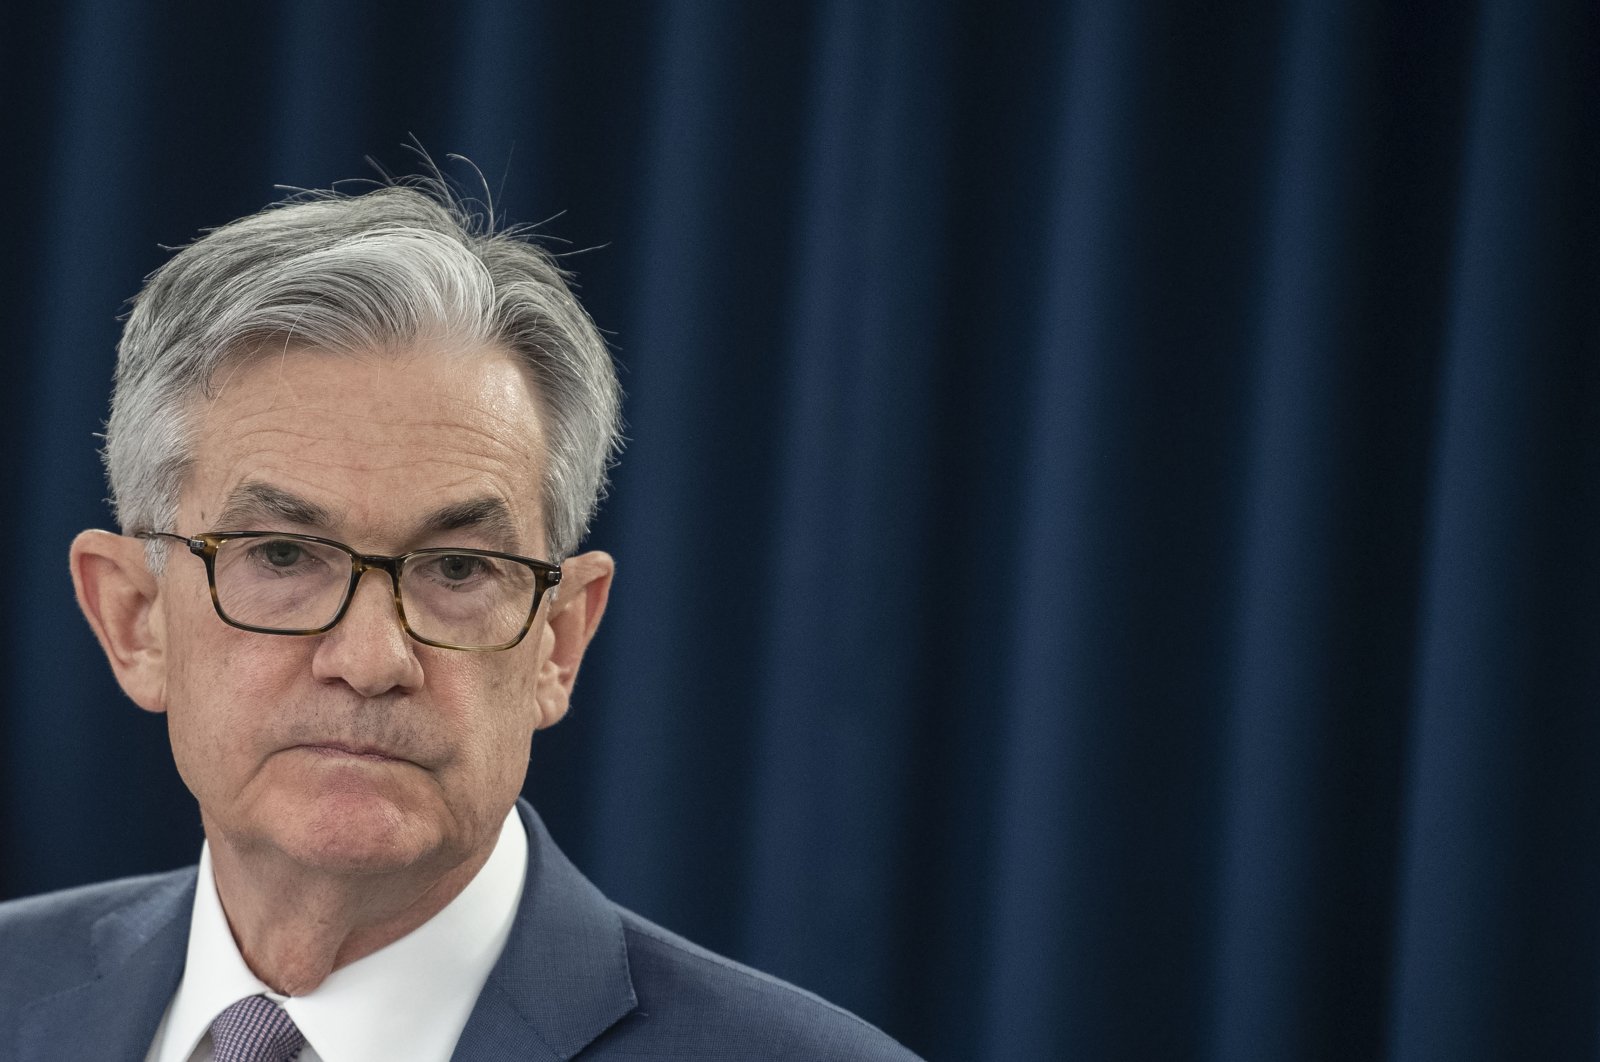 In this file photo, U.S. Federal Reserve Chairman Jerome Powell gives a press briefing, Washington, D.C., March 3, 2020. (AFP Photo)